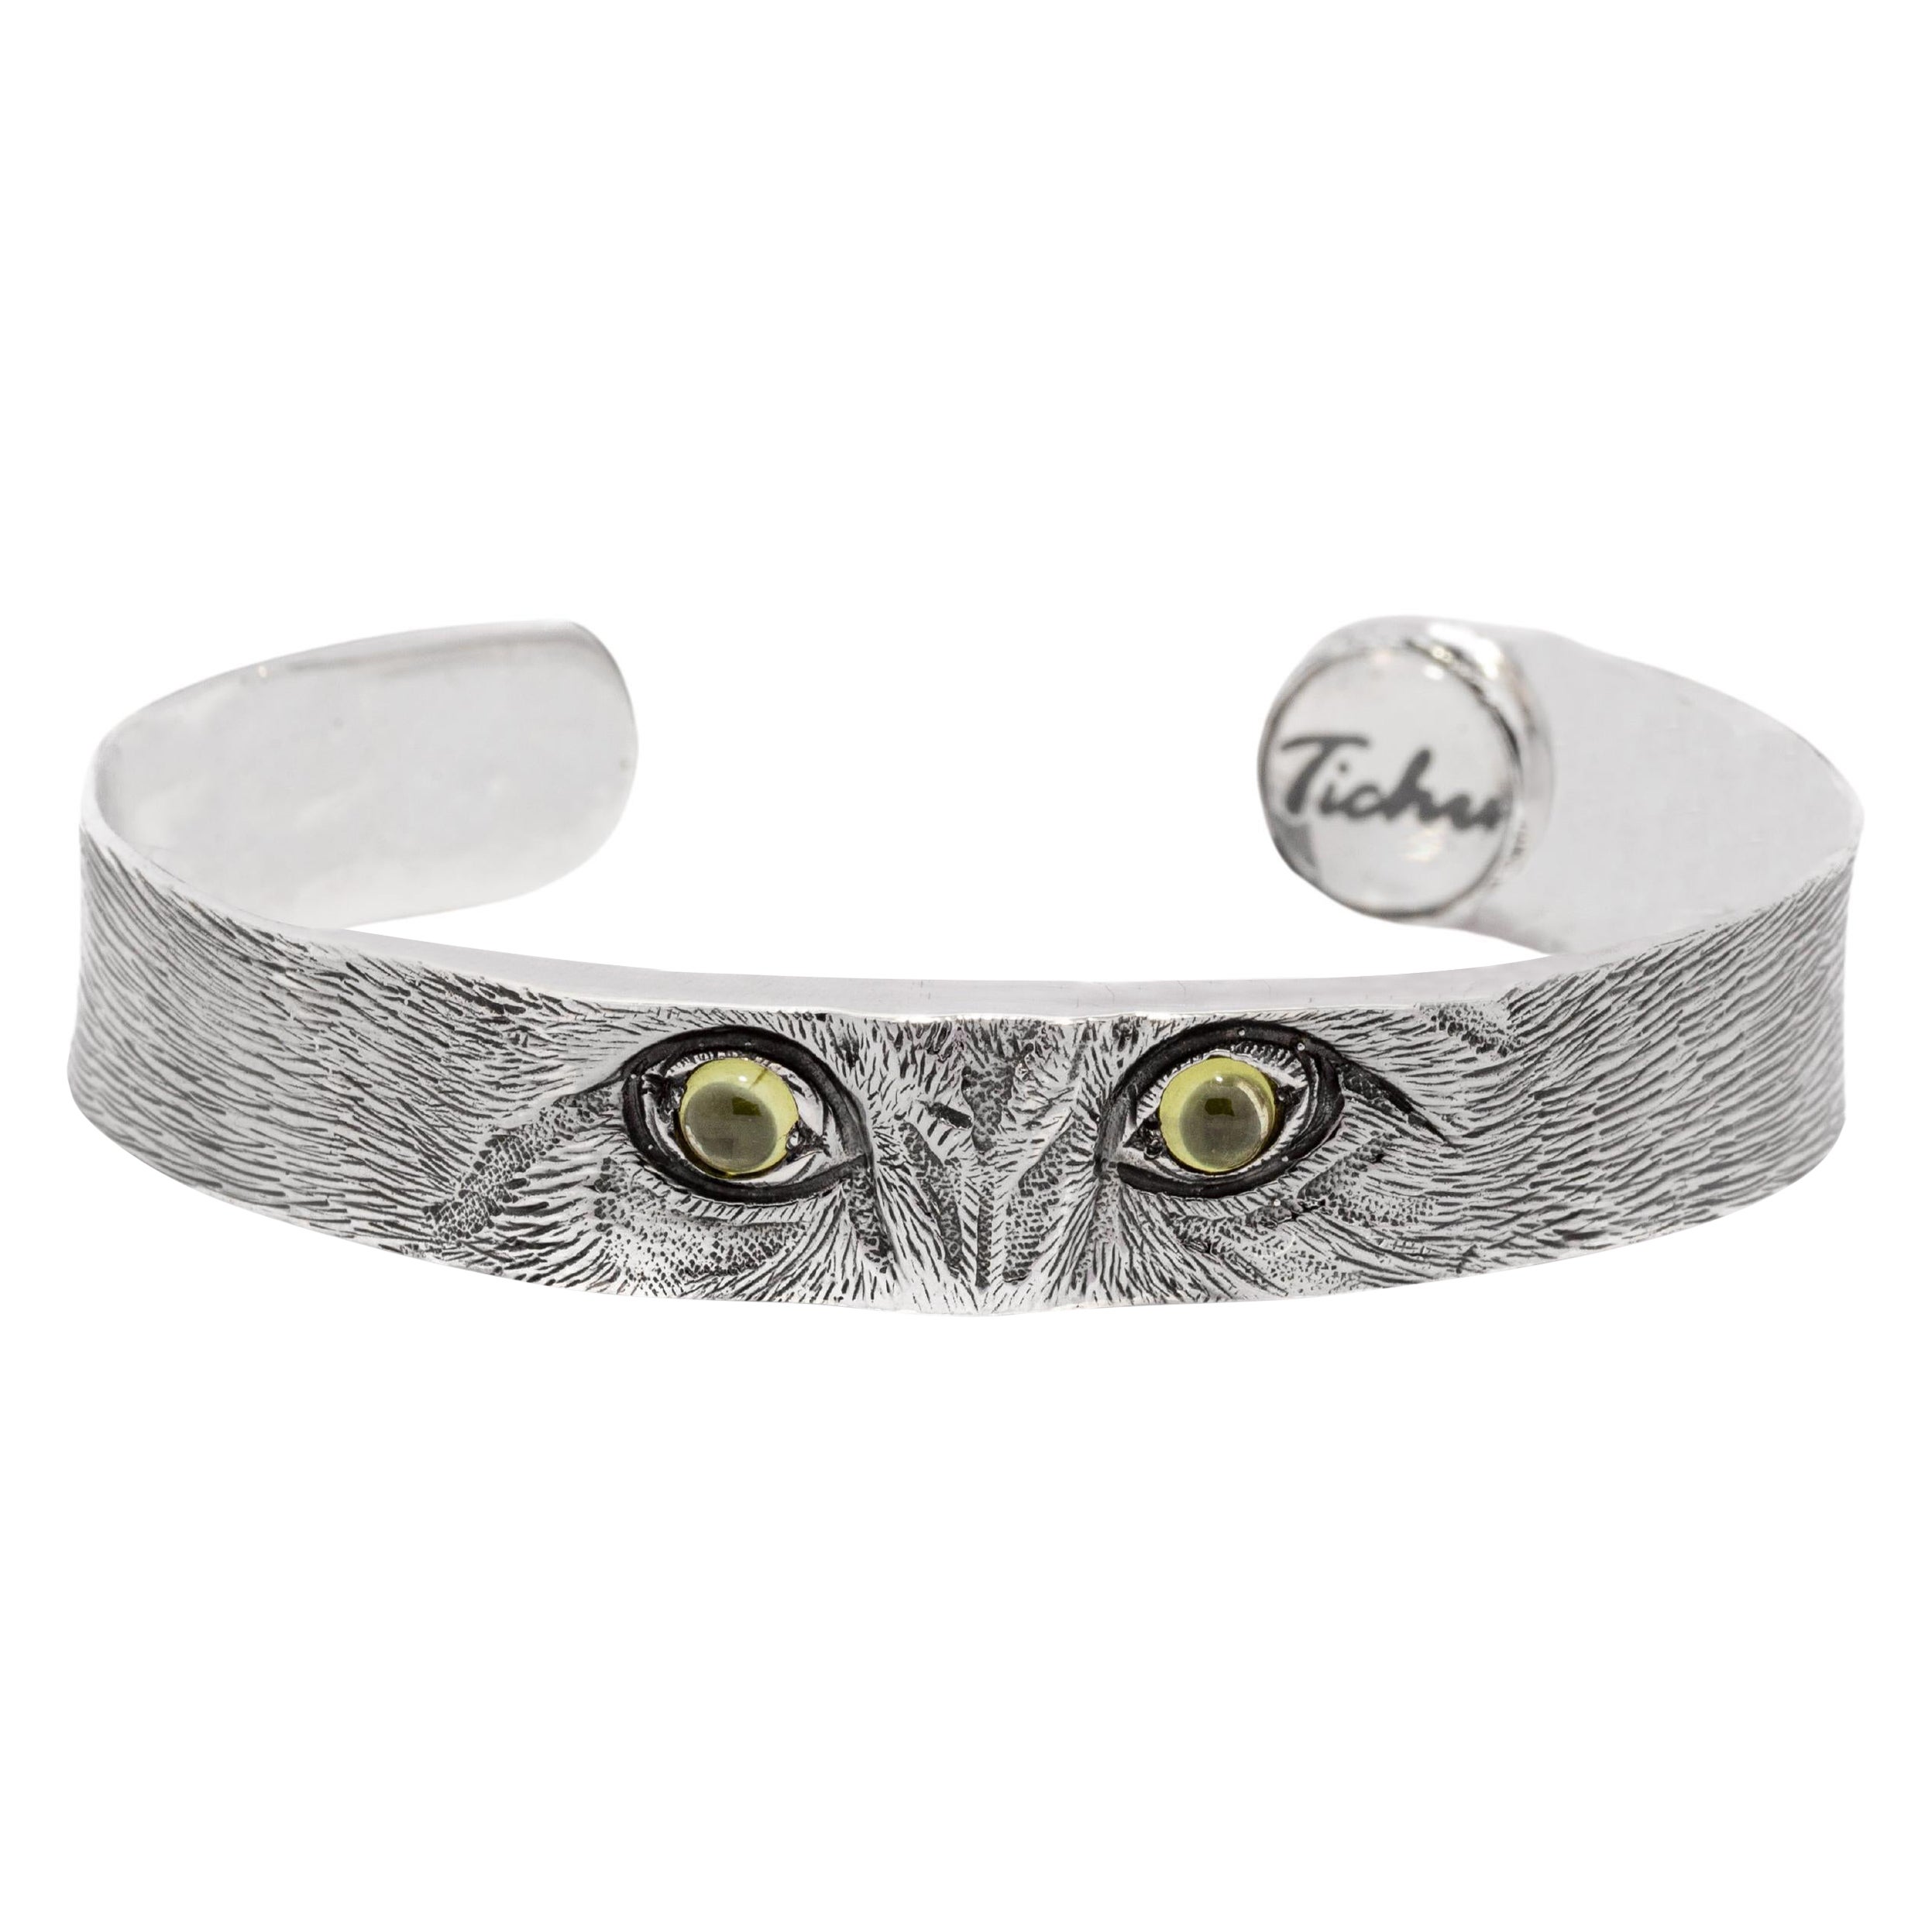 Tichu Peridot Cat Eyes Cuff in Sterling Silver and Crystal Quartz 'Size S'